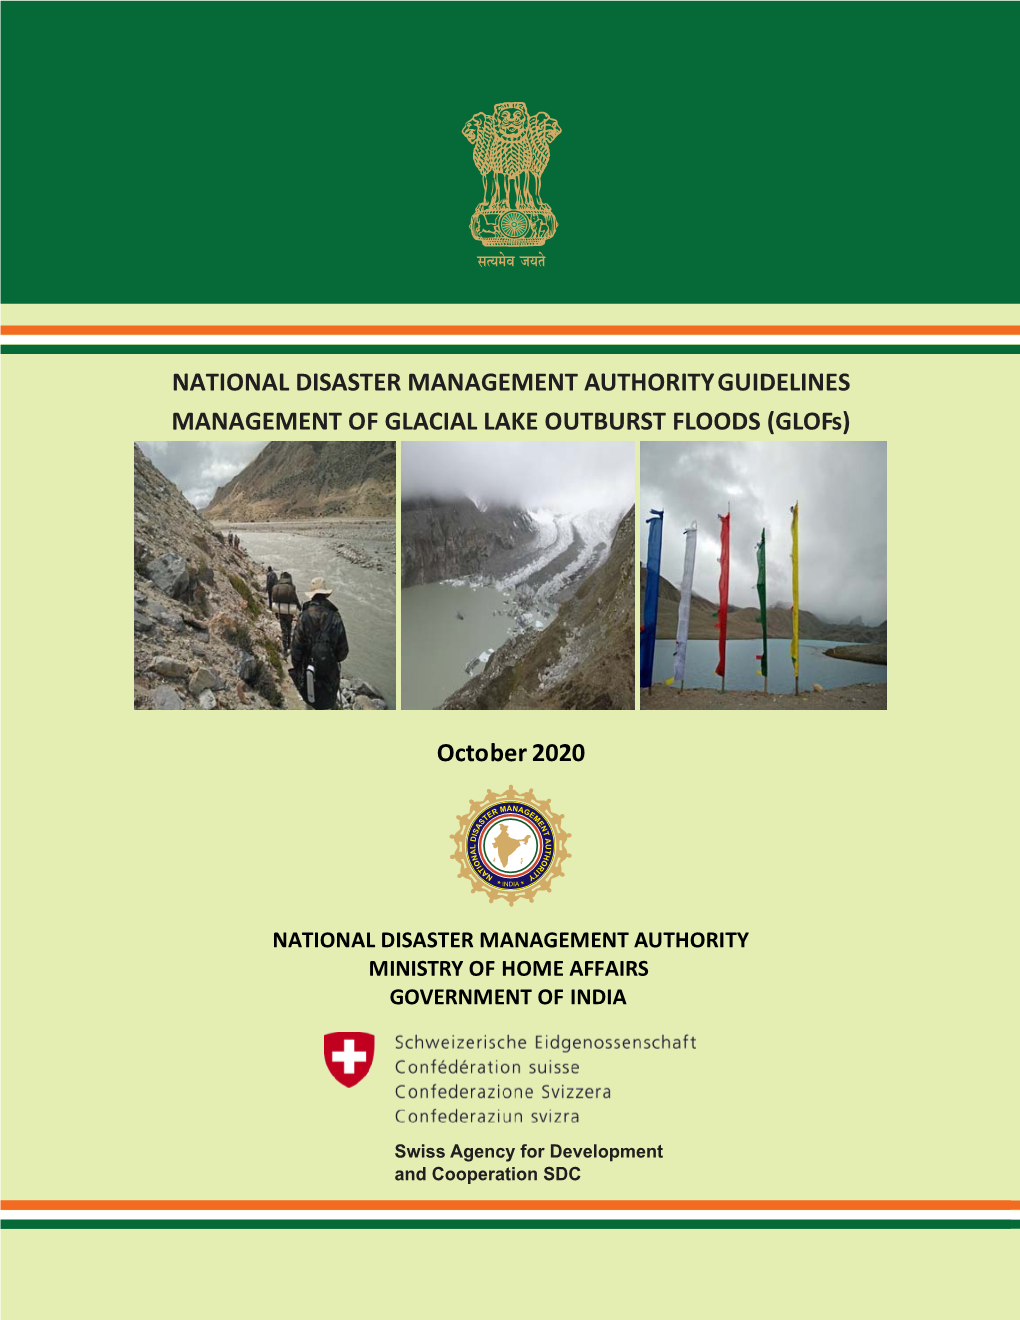 Guidelines for Management of Glacial Lake Outburst Floods (Glofs) Could Be Accomplished Through Constitution of Task Force of Inter-Disciplinary Experts